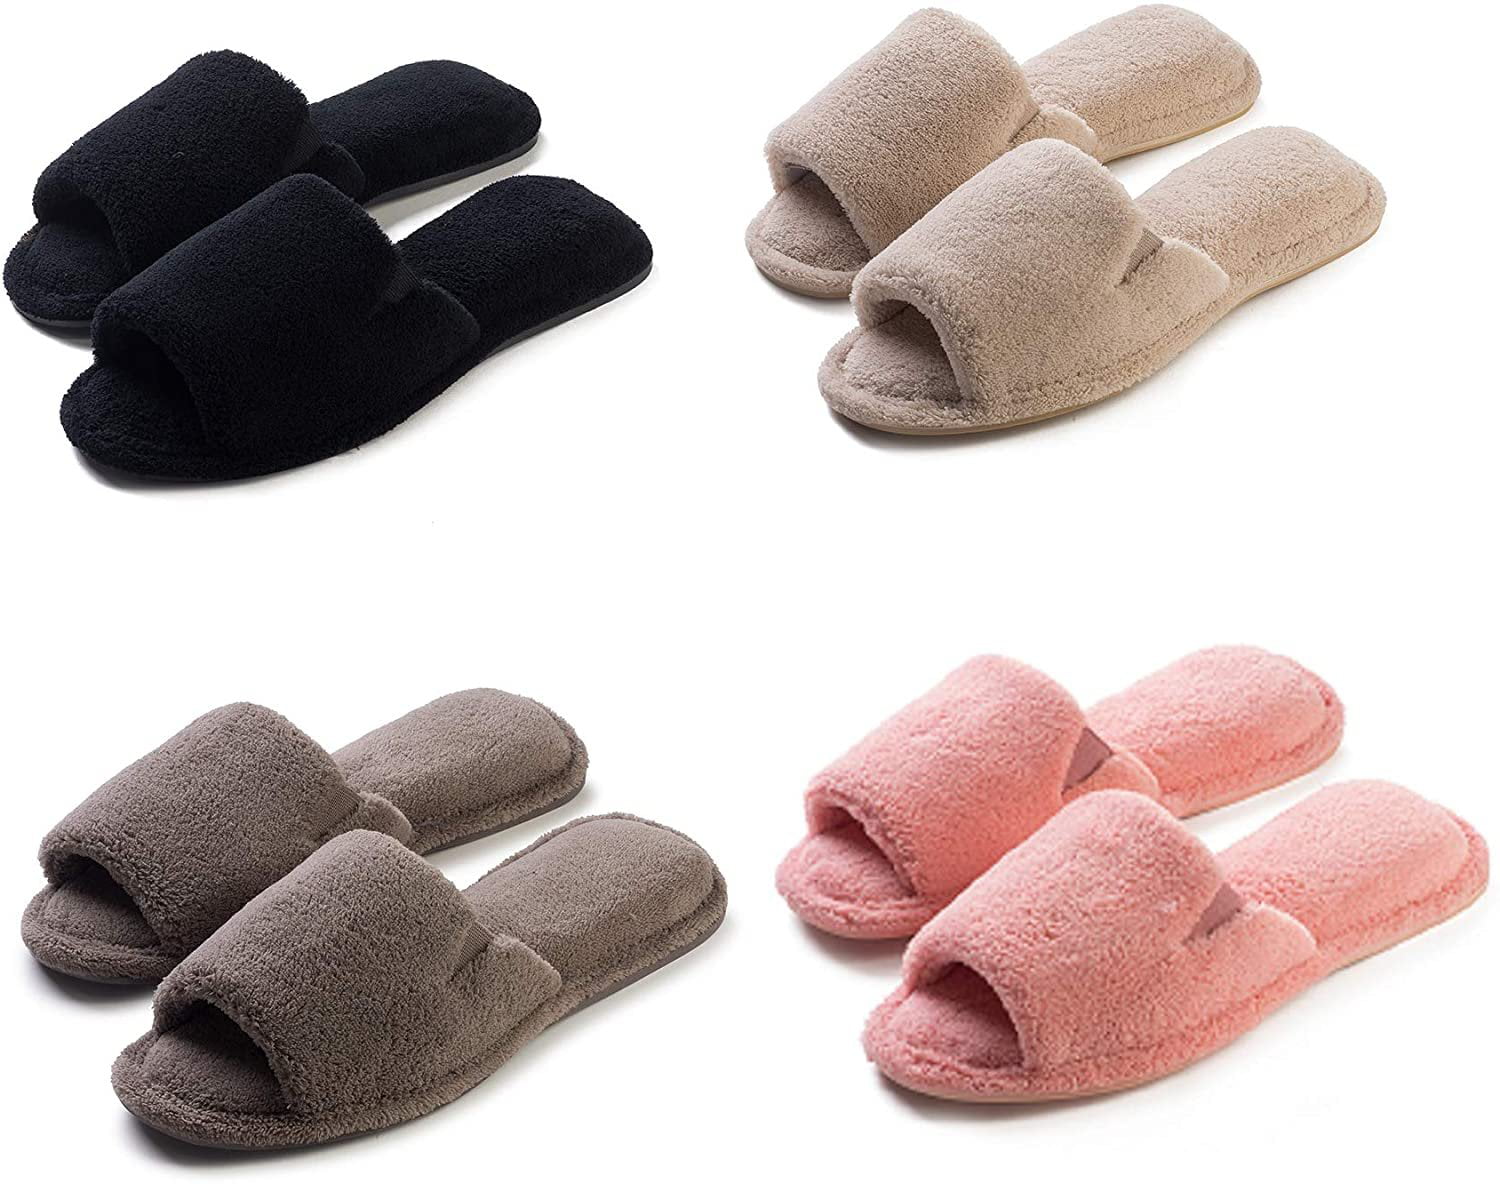 Cozy Fuzzy Terry Bathroom Open Toe House and Shower Shoes Roxoni Ultra Soft Spa Slippers for Women Washable 